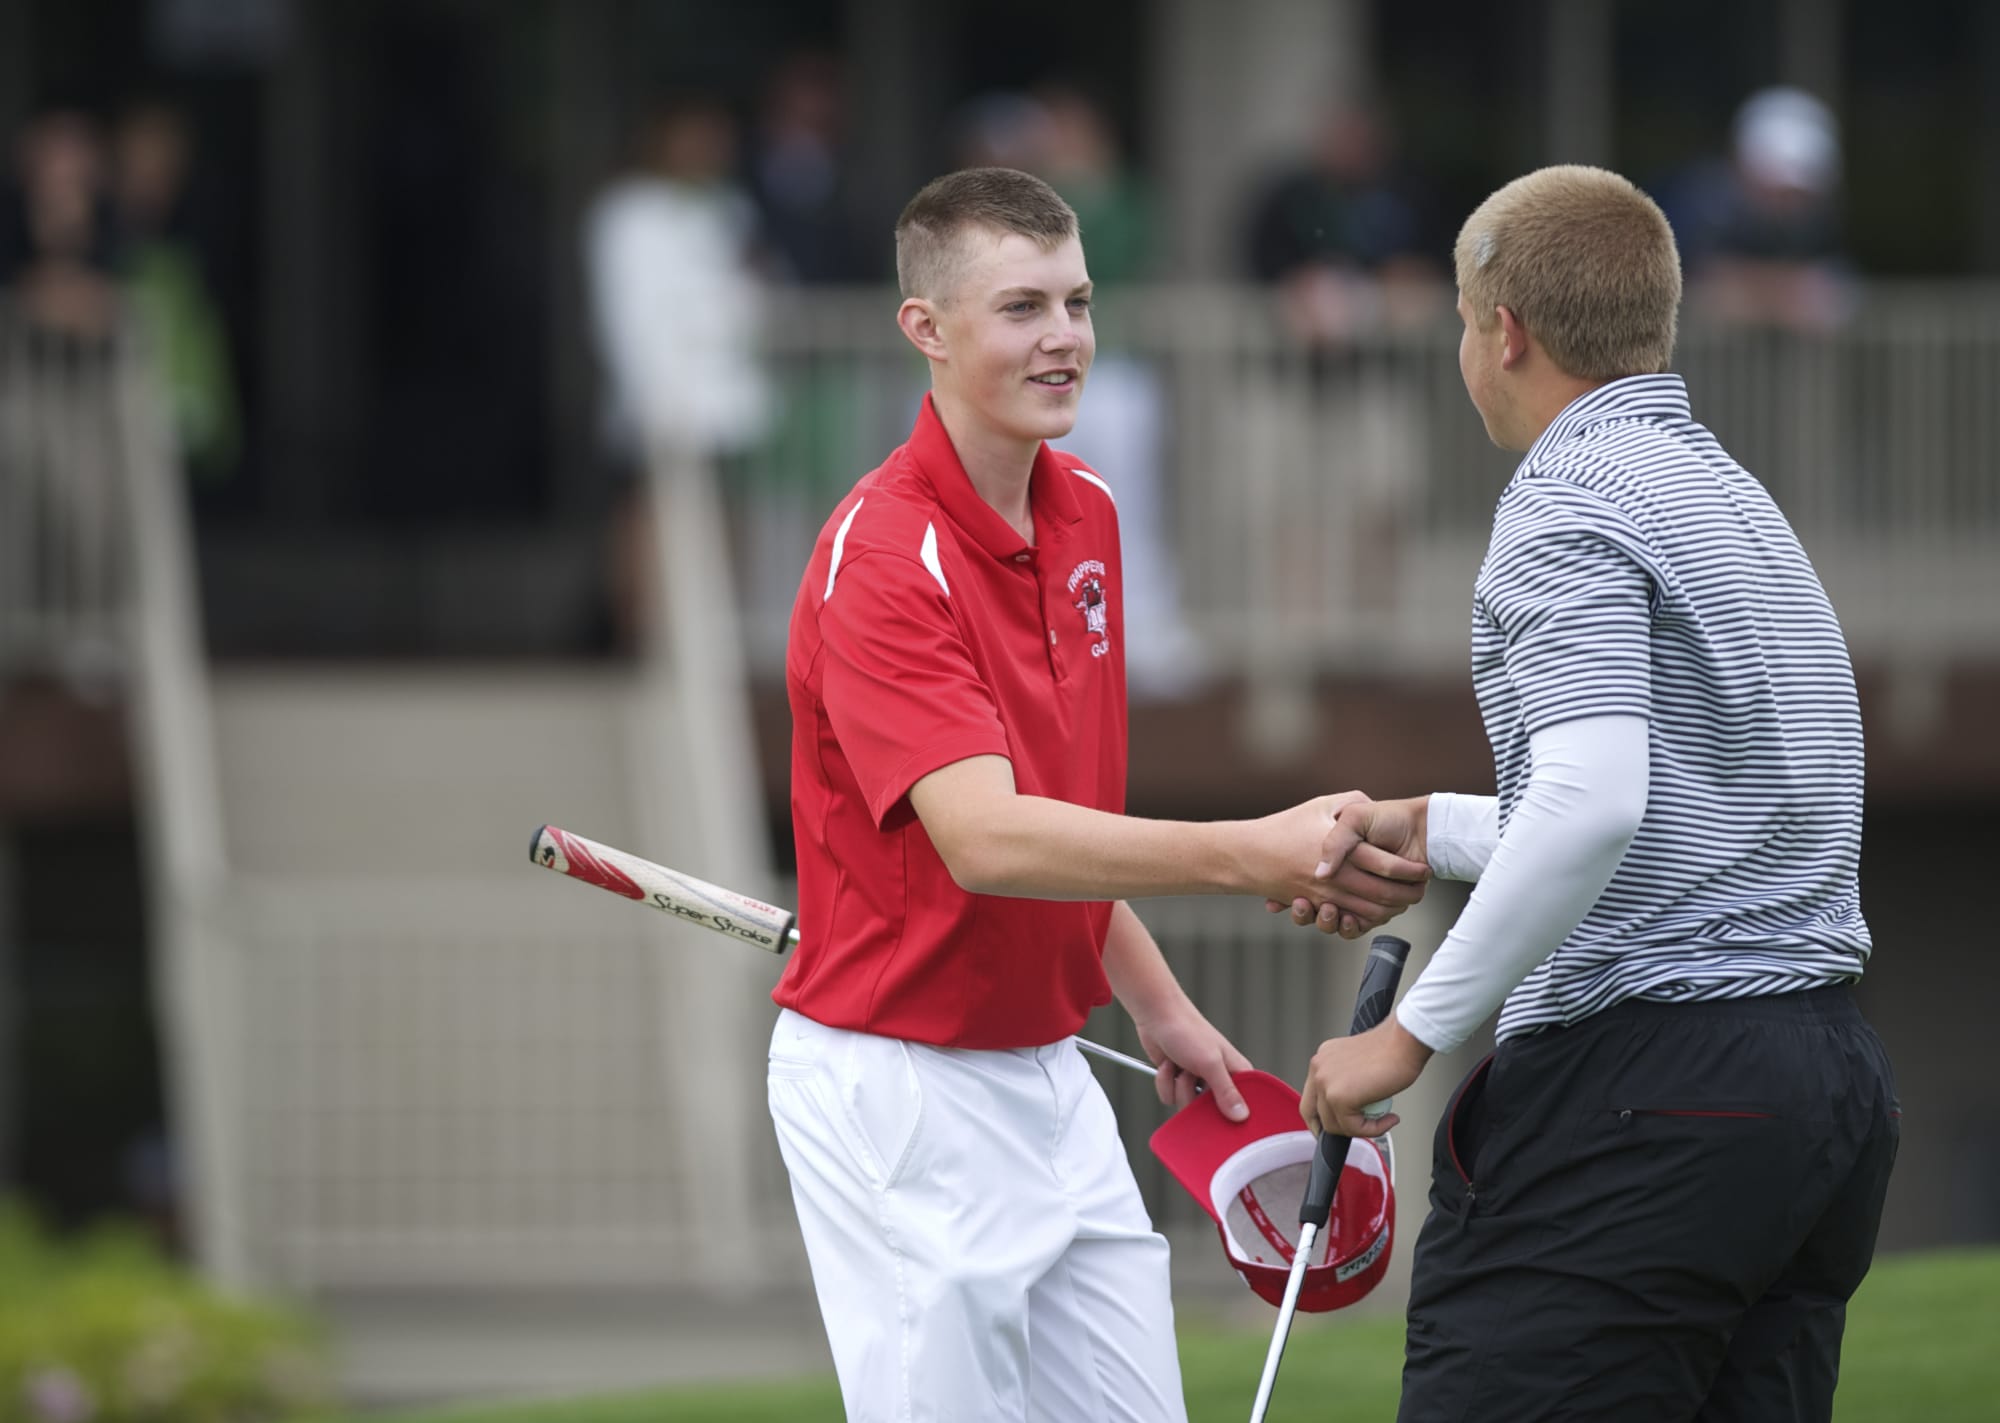 Spencer Tibbits of Fort Vancouver, left, who won the 3A boys title, shakes hands with Columbia River's Spencer Long who tied for fifth at Tri-Mountain Golf Course on Thursday May 29, 2014.